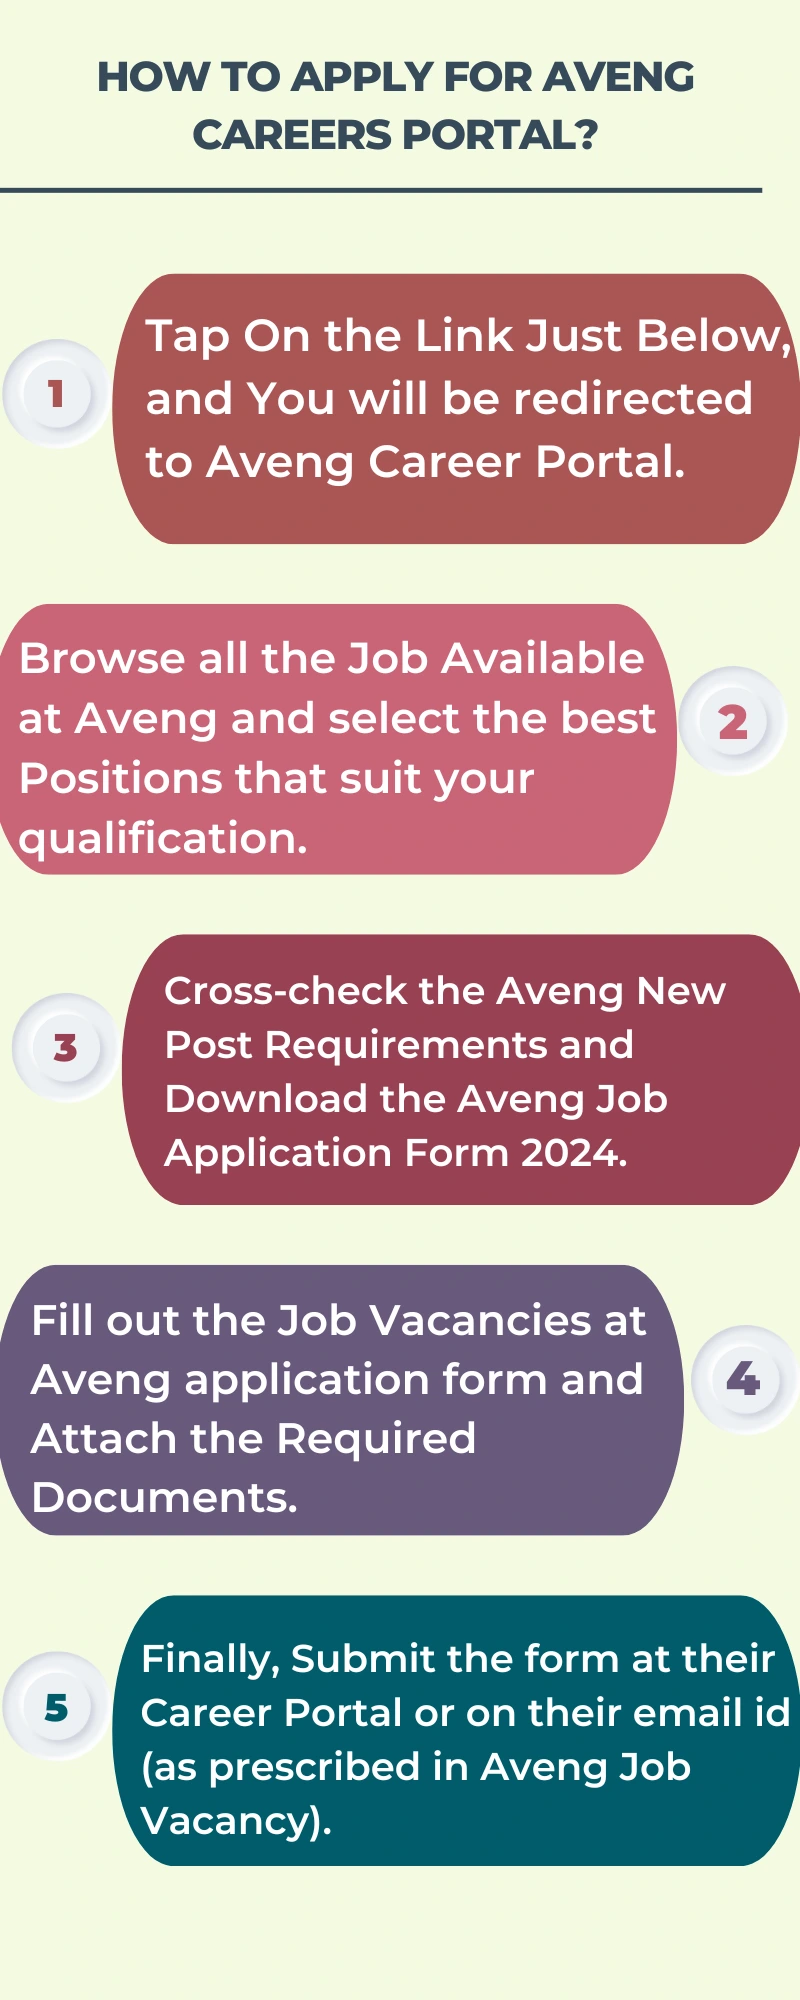 How To Apply for Aveng Careers Portal?